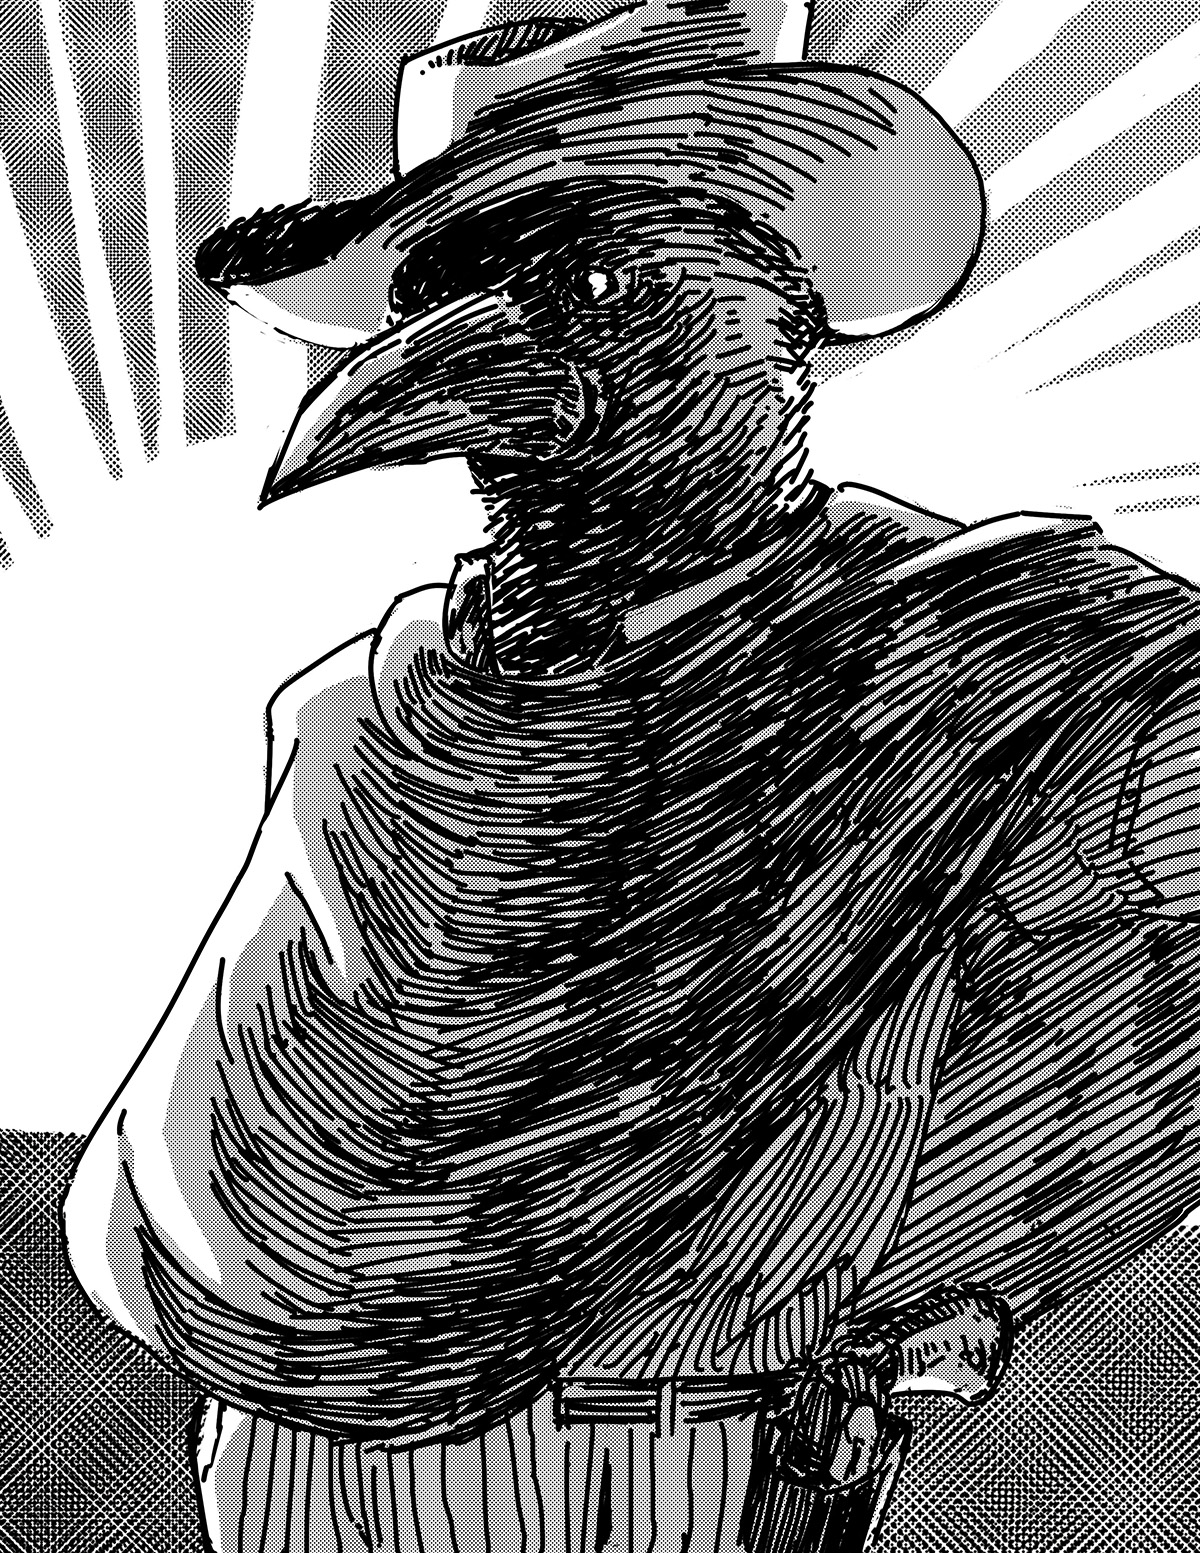 A black and white illustration of a bird with a hat and a gun in a holster.